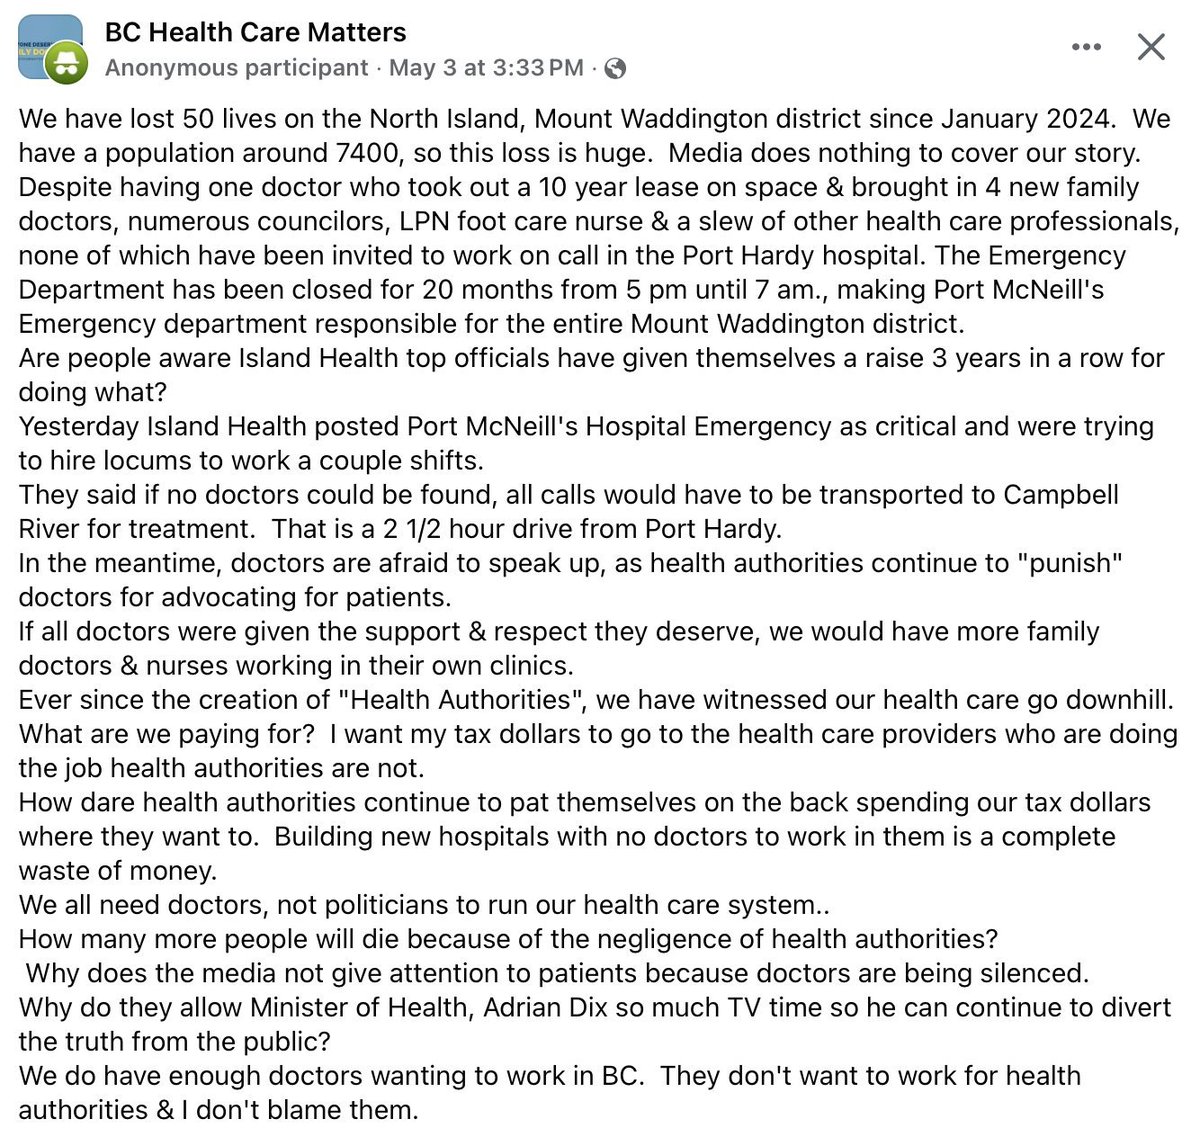 Another glowing report on the state of health care in British Columbia under the @bcndp government

@adriandix should resign immediately so change can happen - IMMEDIATELY 

#bcpoli #cdnpoli #vanpoli